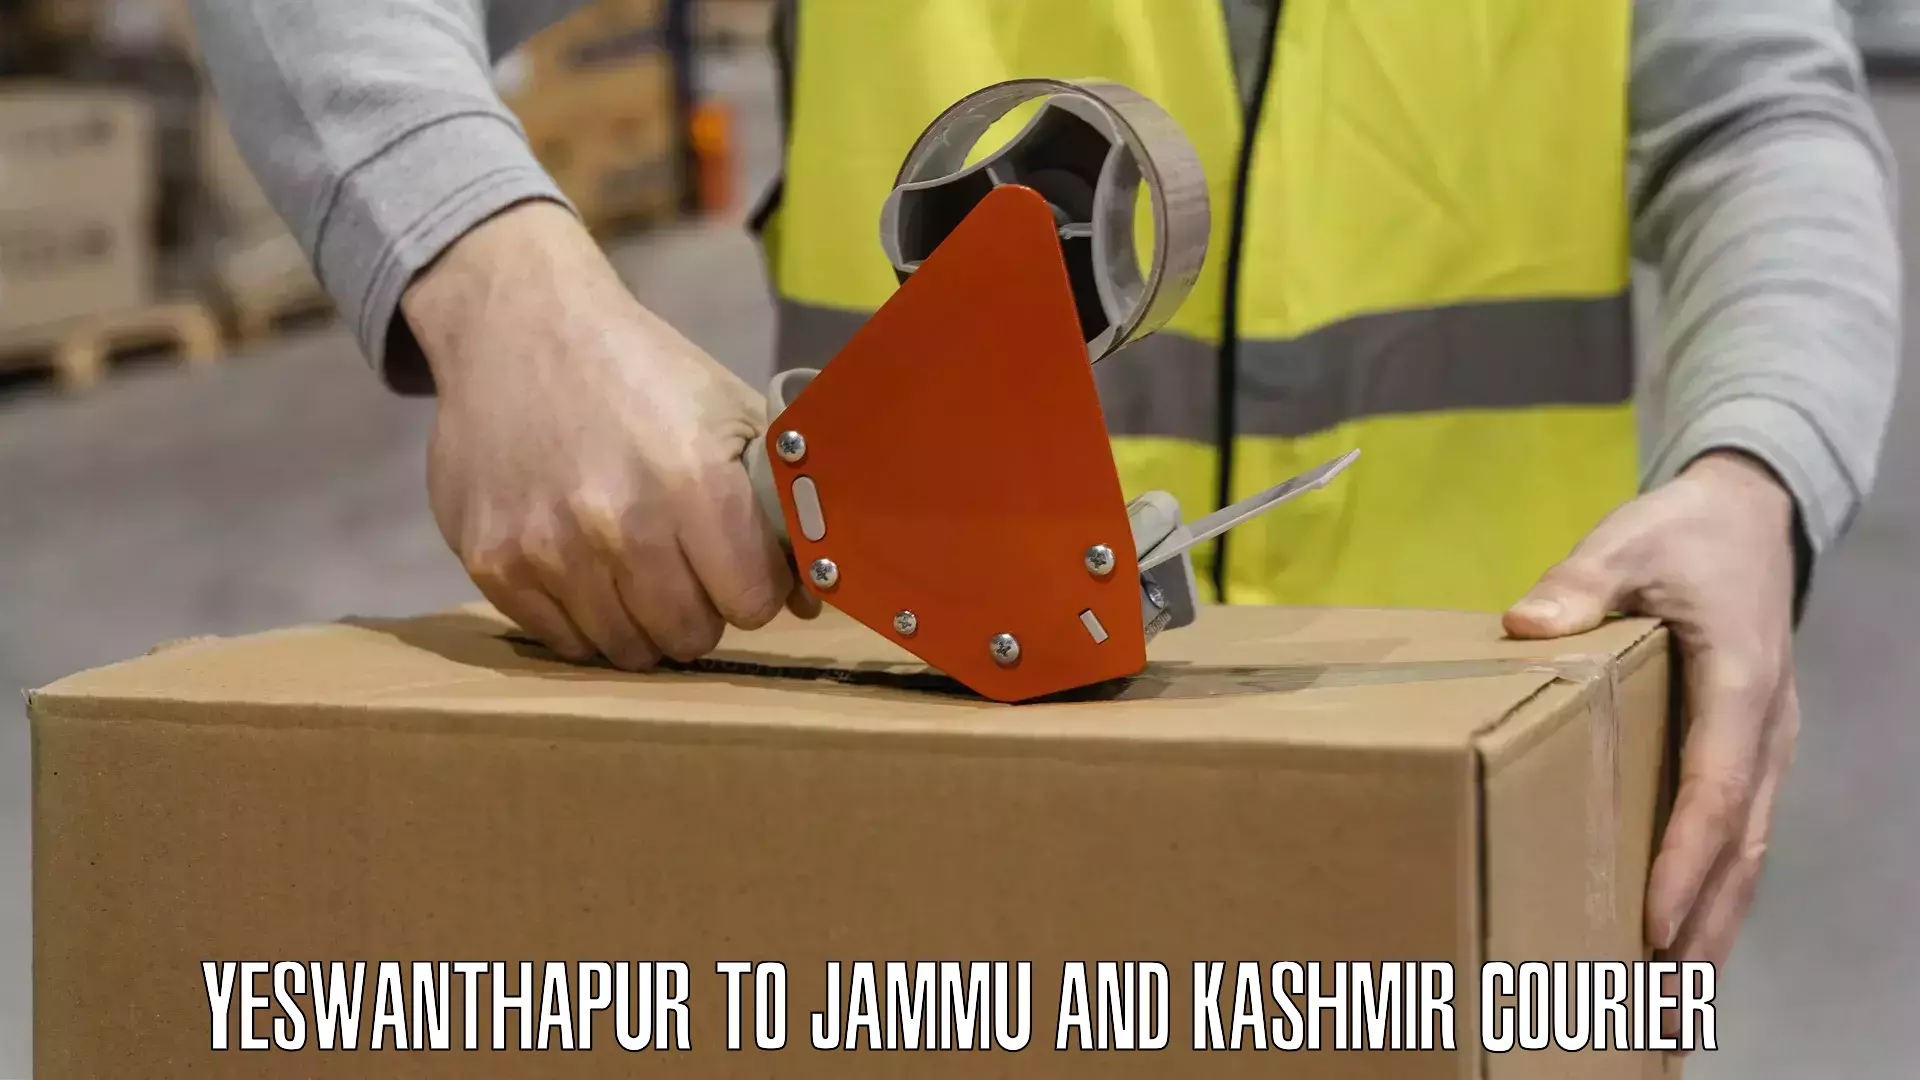 Comprehensive shipping network Yeswanthapur to Jammu and Kashmir